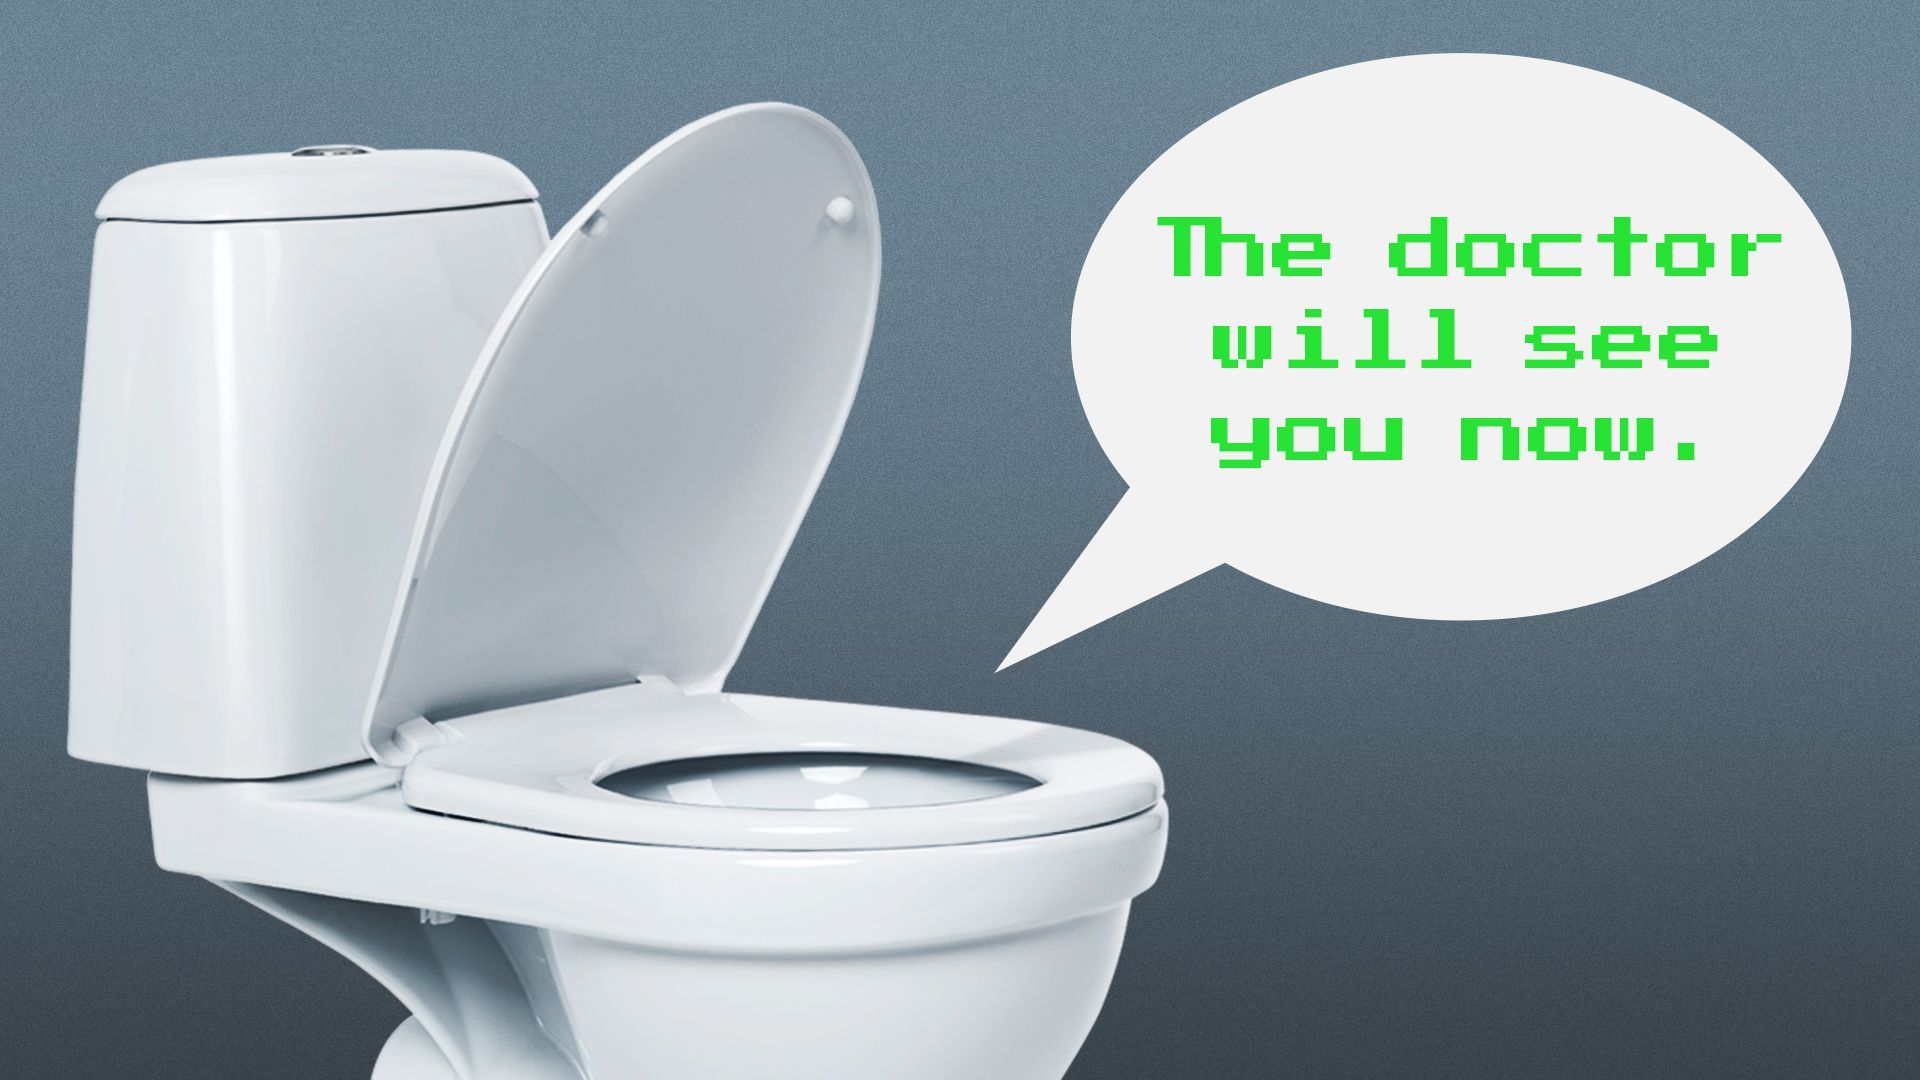  Illustration of a toilet with a speech bubble saying “The doctor will see you now.”